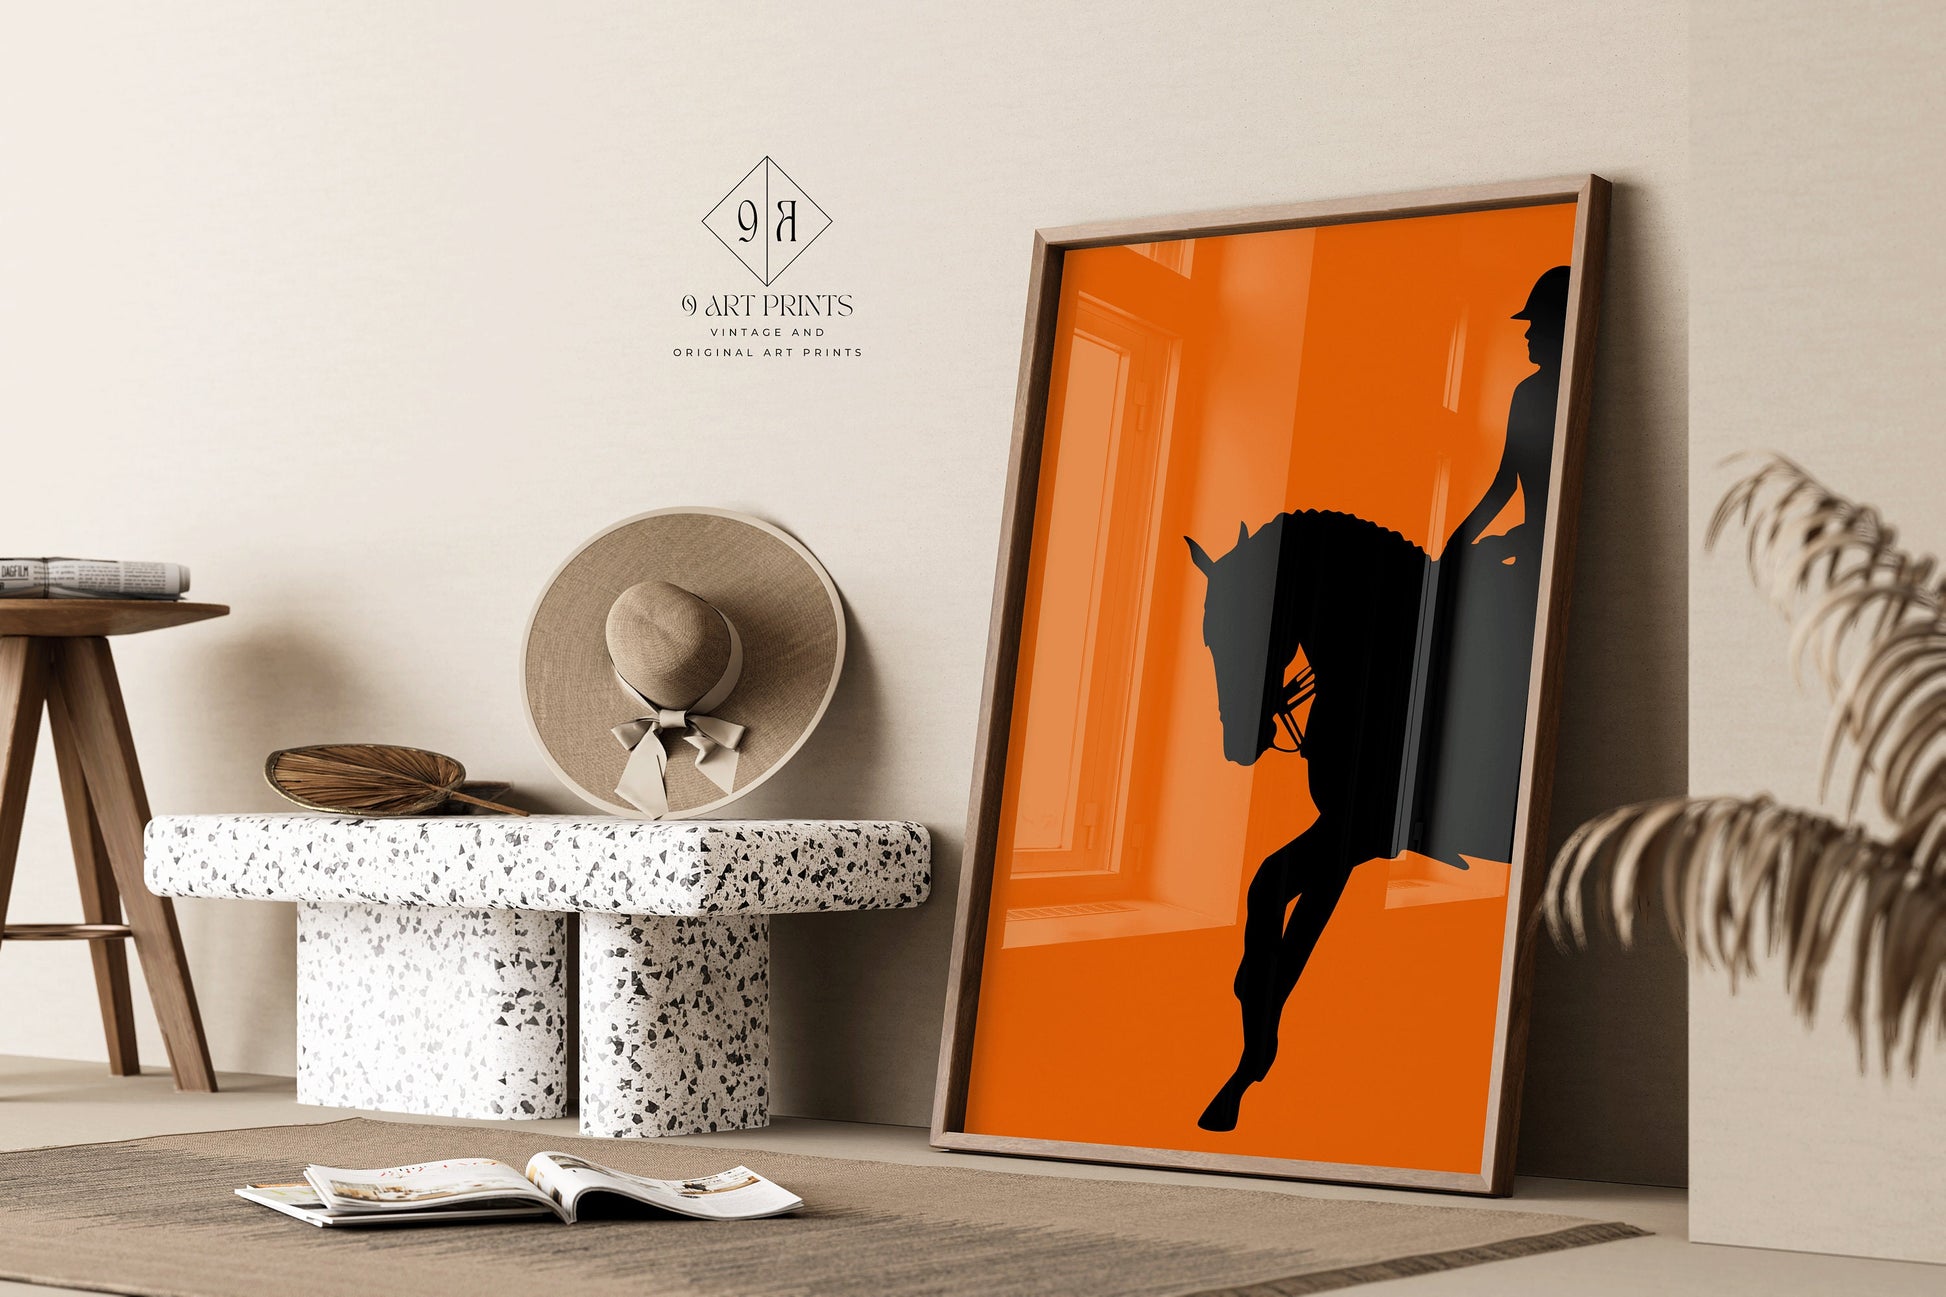 Dressage Horse and Rider Poster in Orange | Equestrian Art (available framed or unframed)